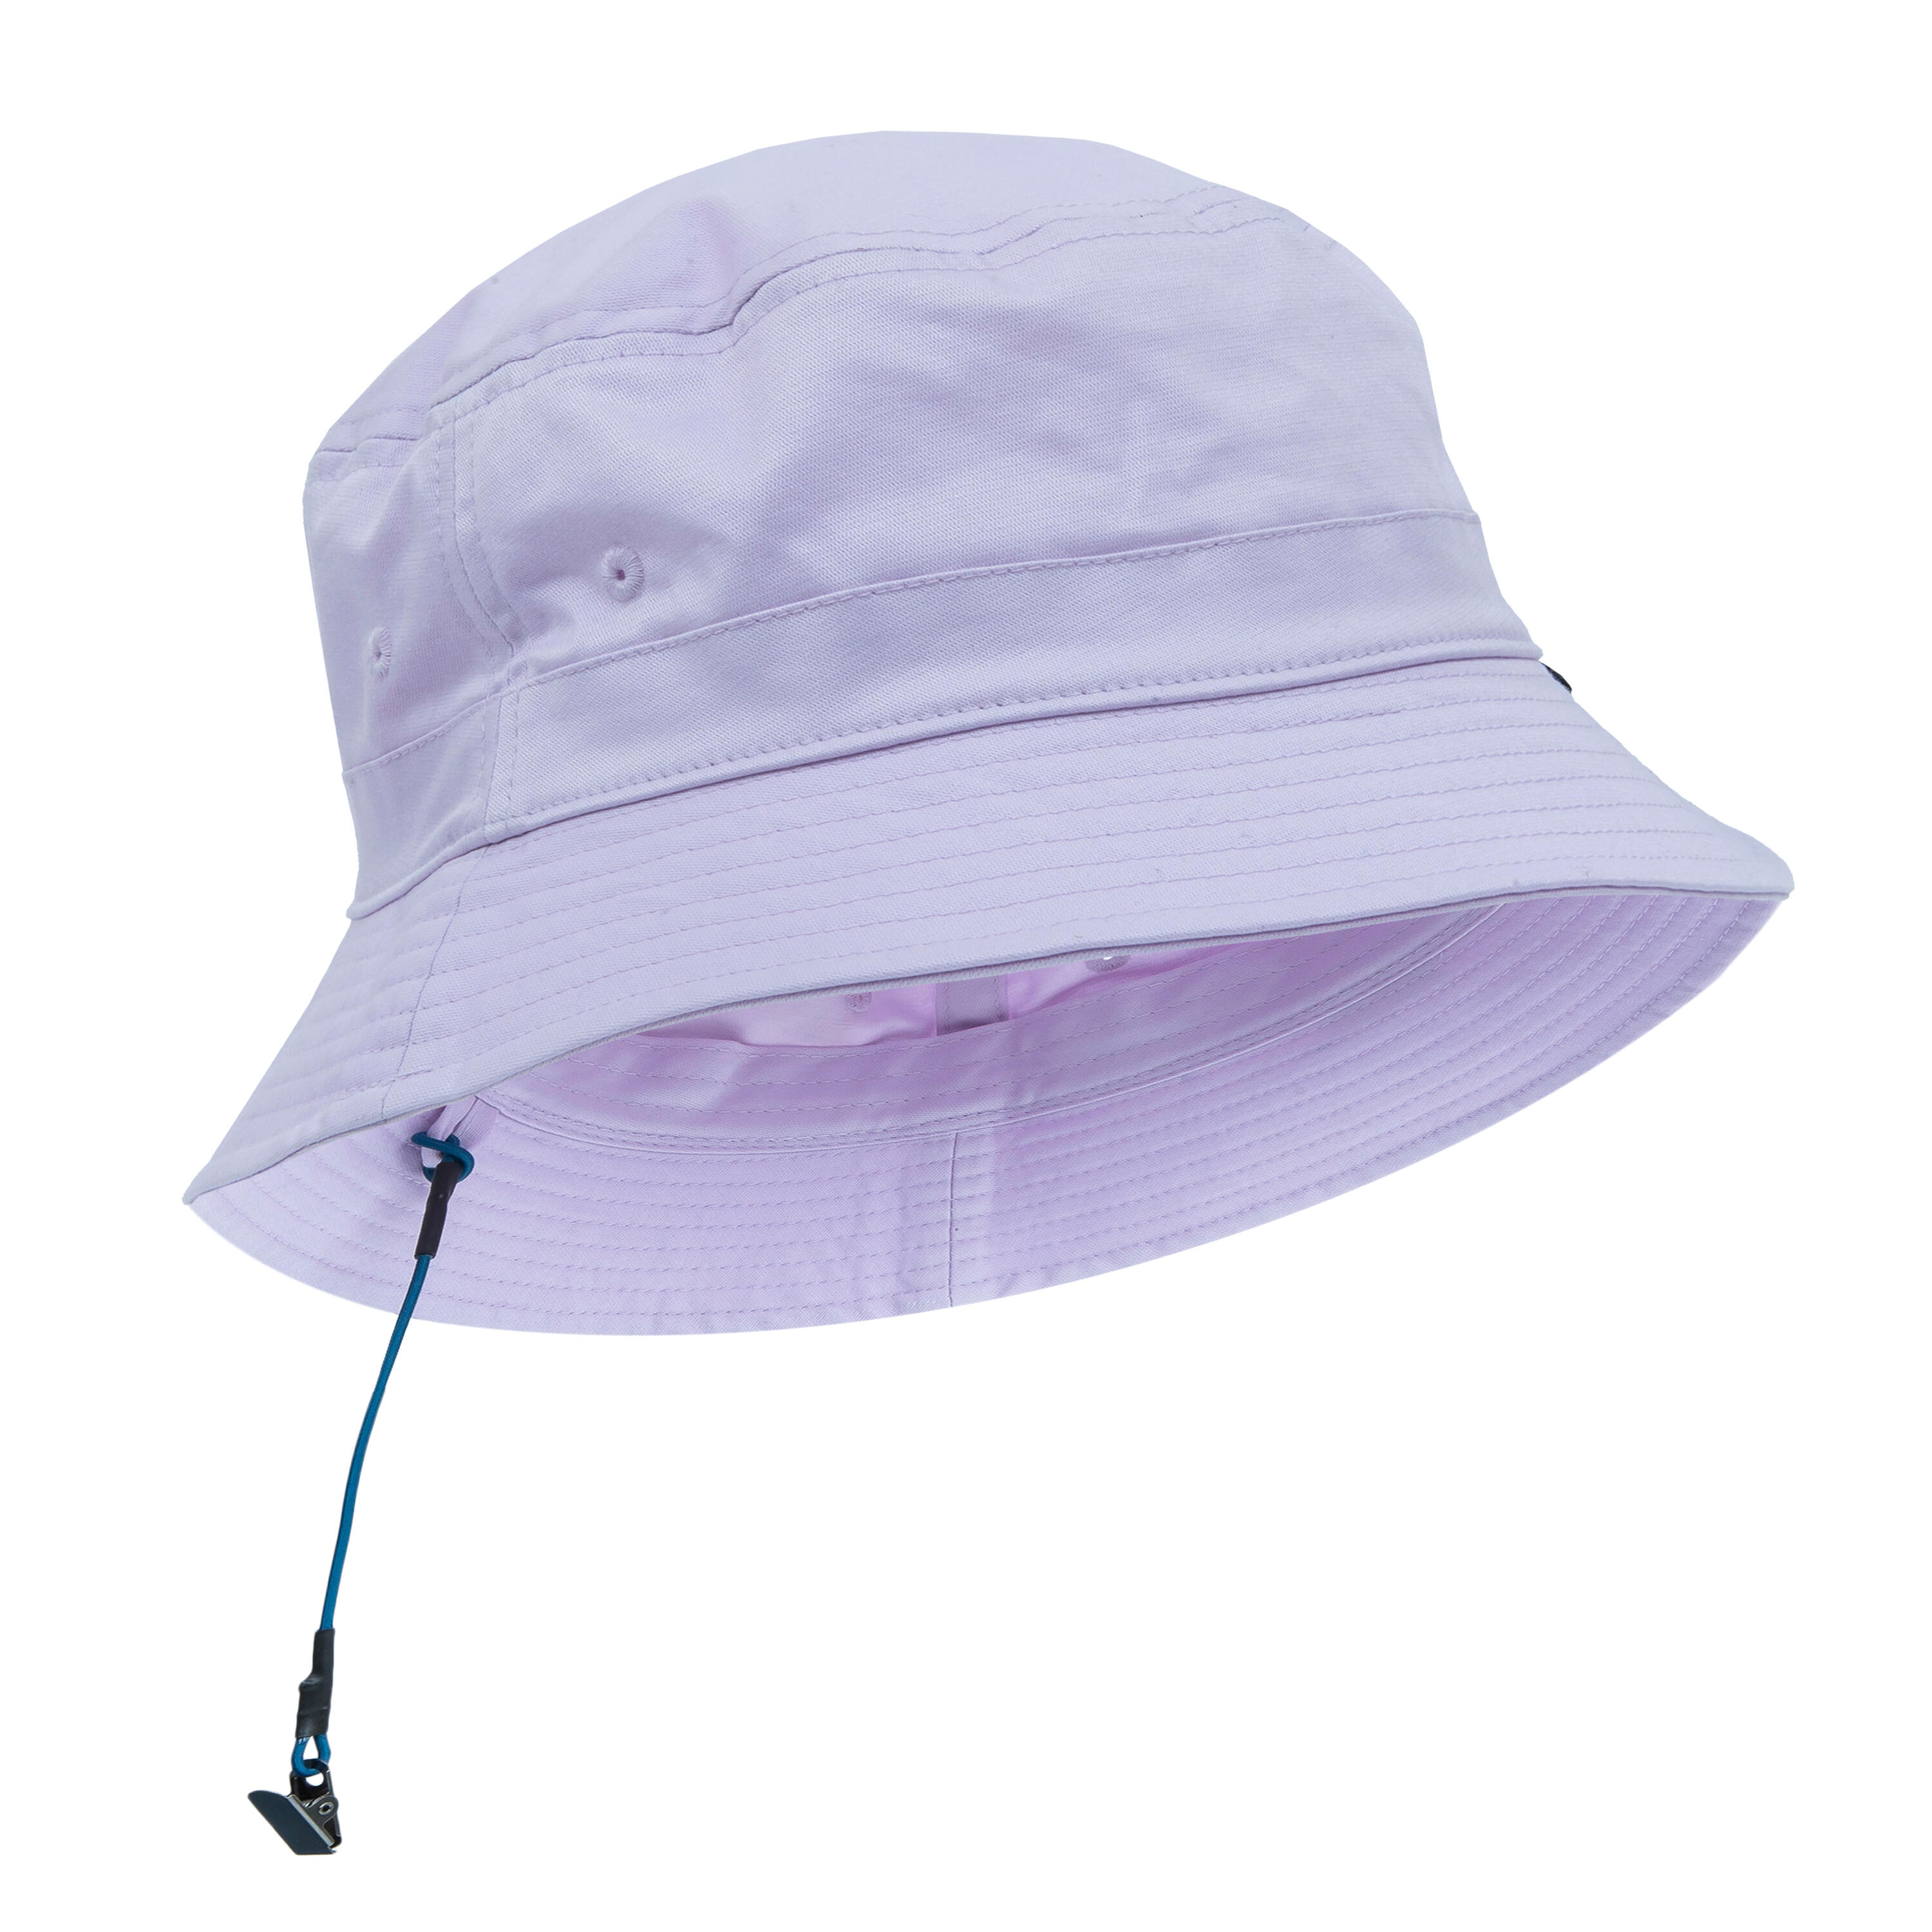 TRIBORD Adults’ Sailing boat hat 100 - Lavender cotton